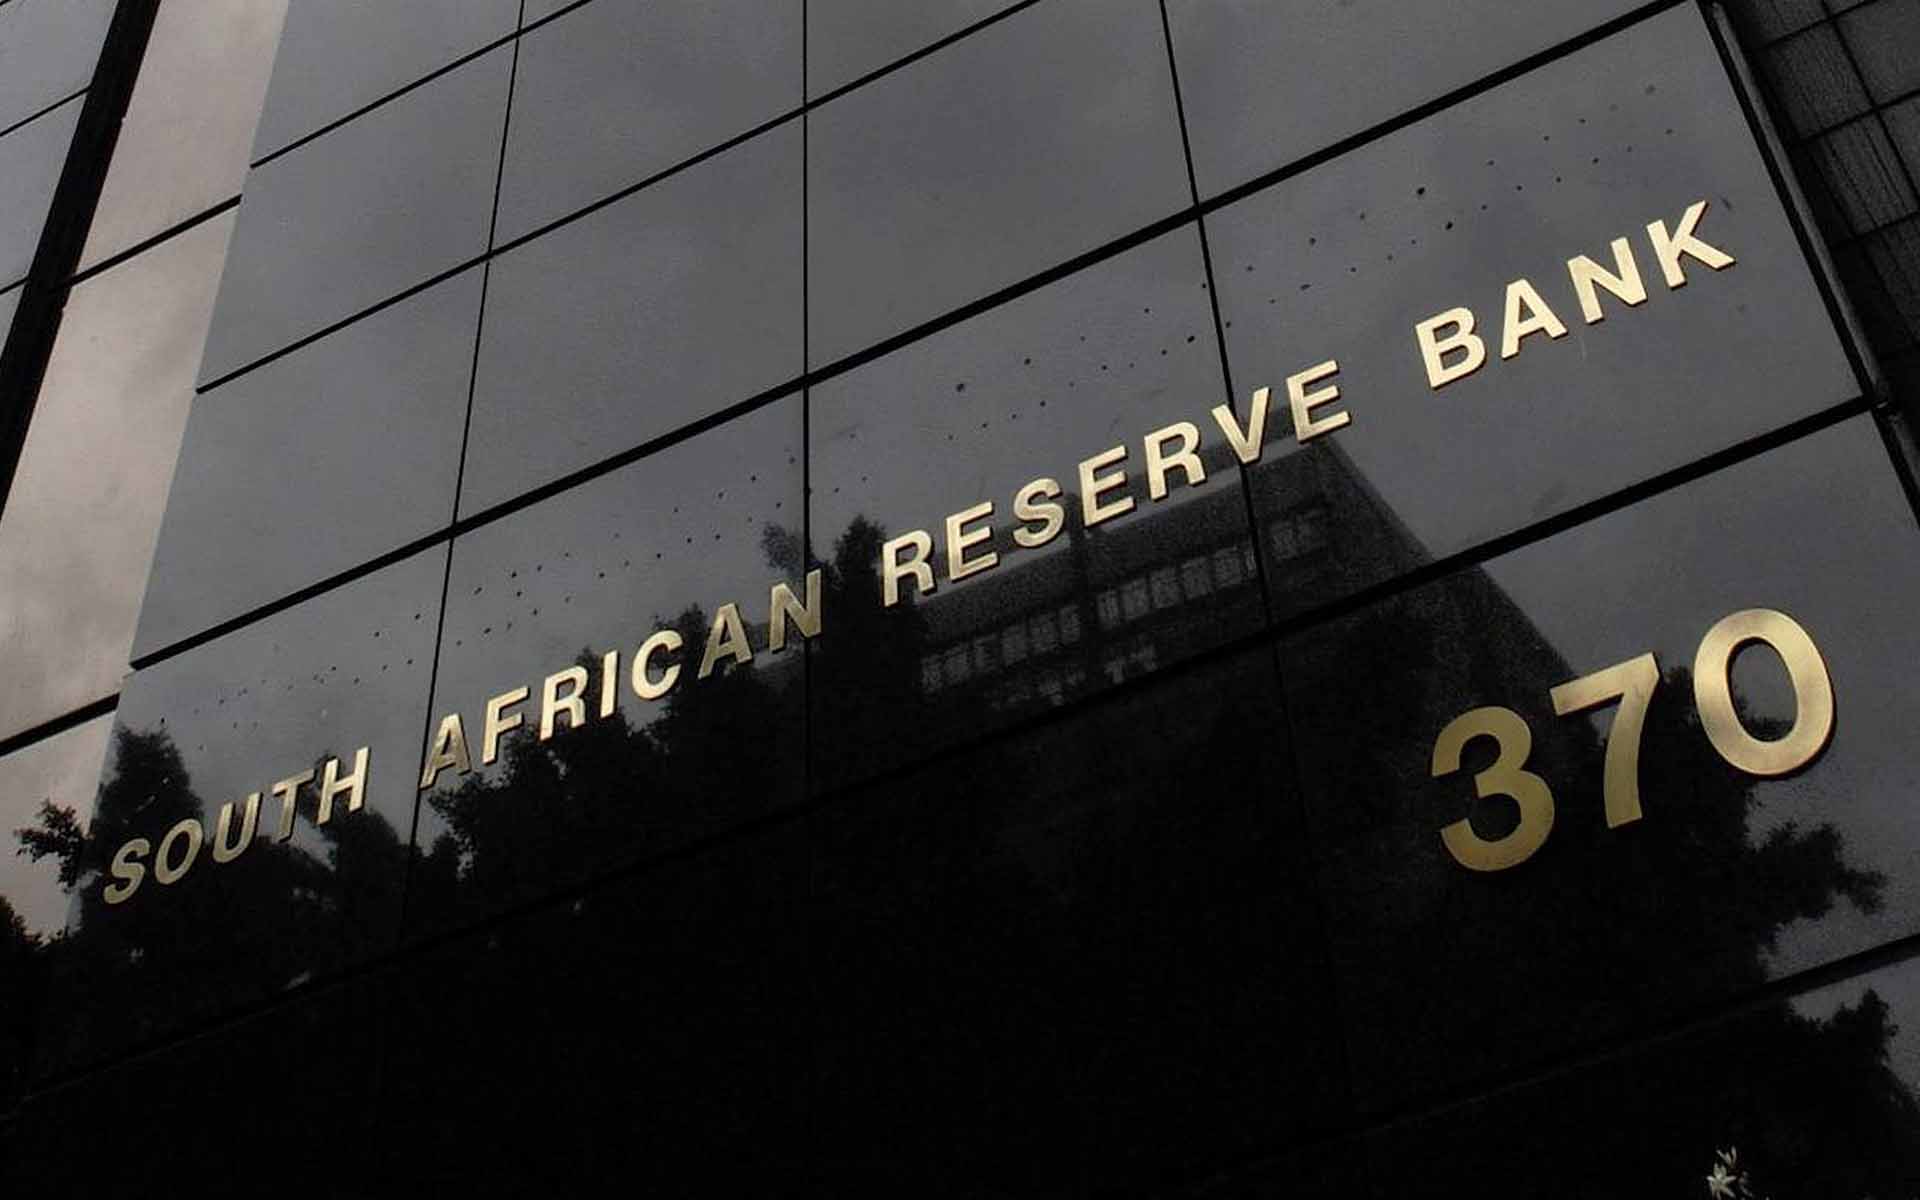 South African Reserve Bank (SARB): Virtual Currencies Are ‘Cyber-tokens’